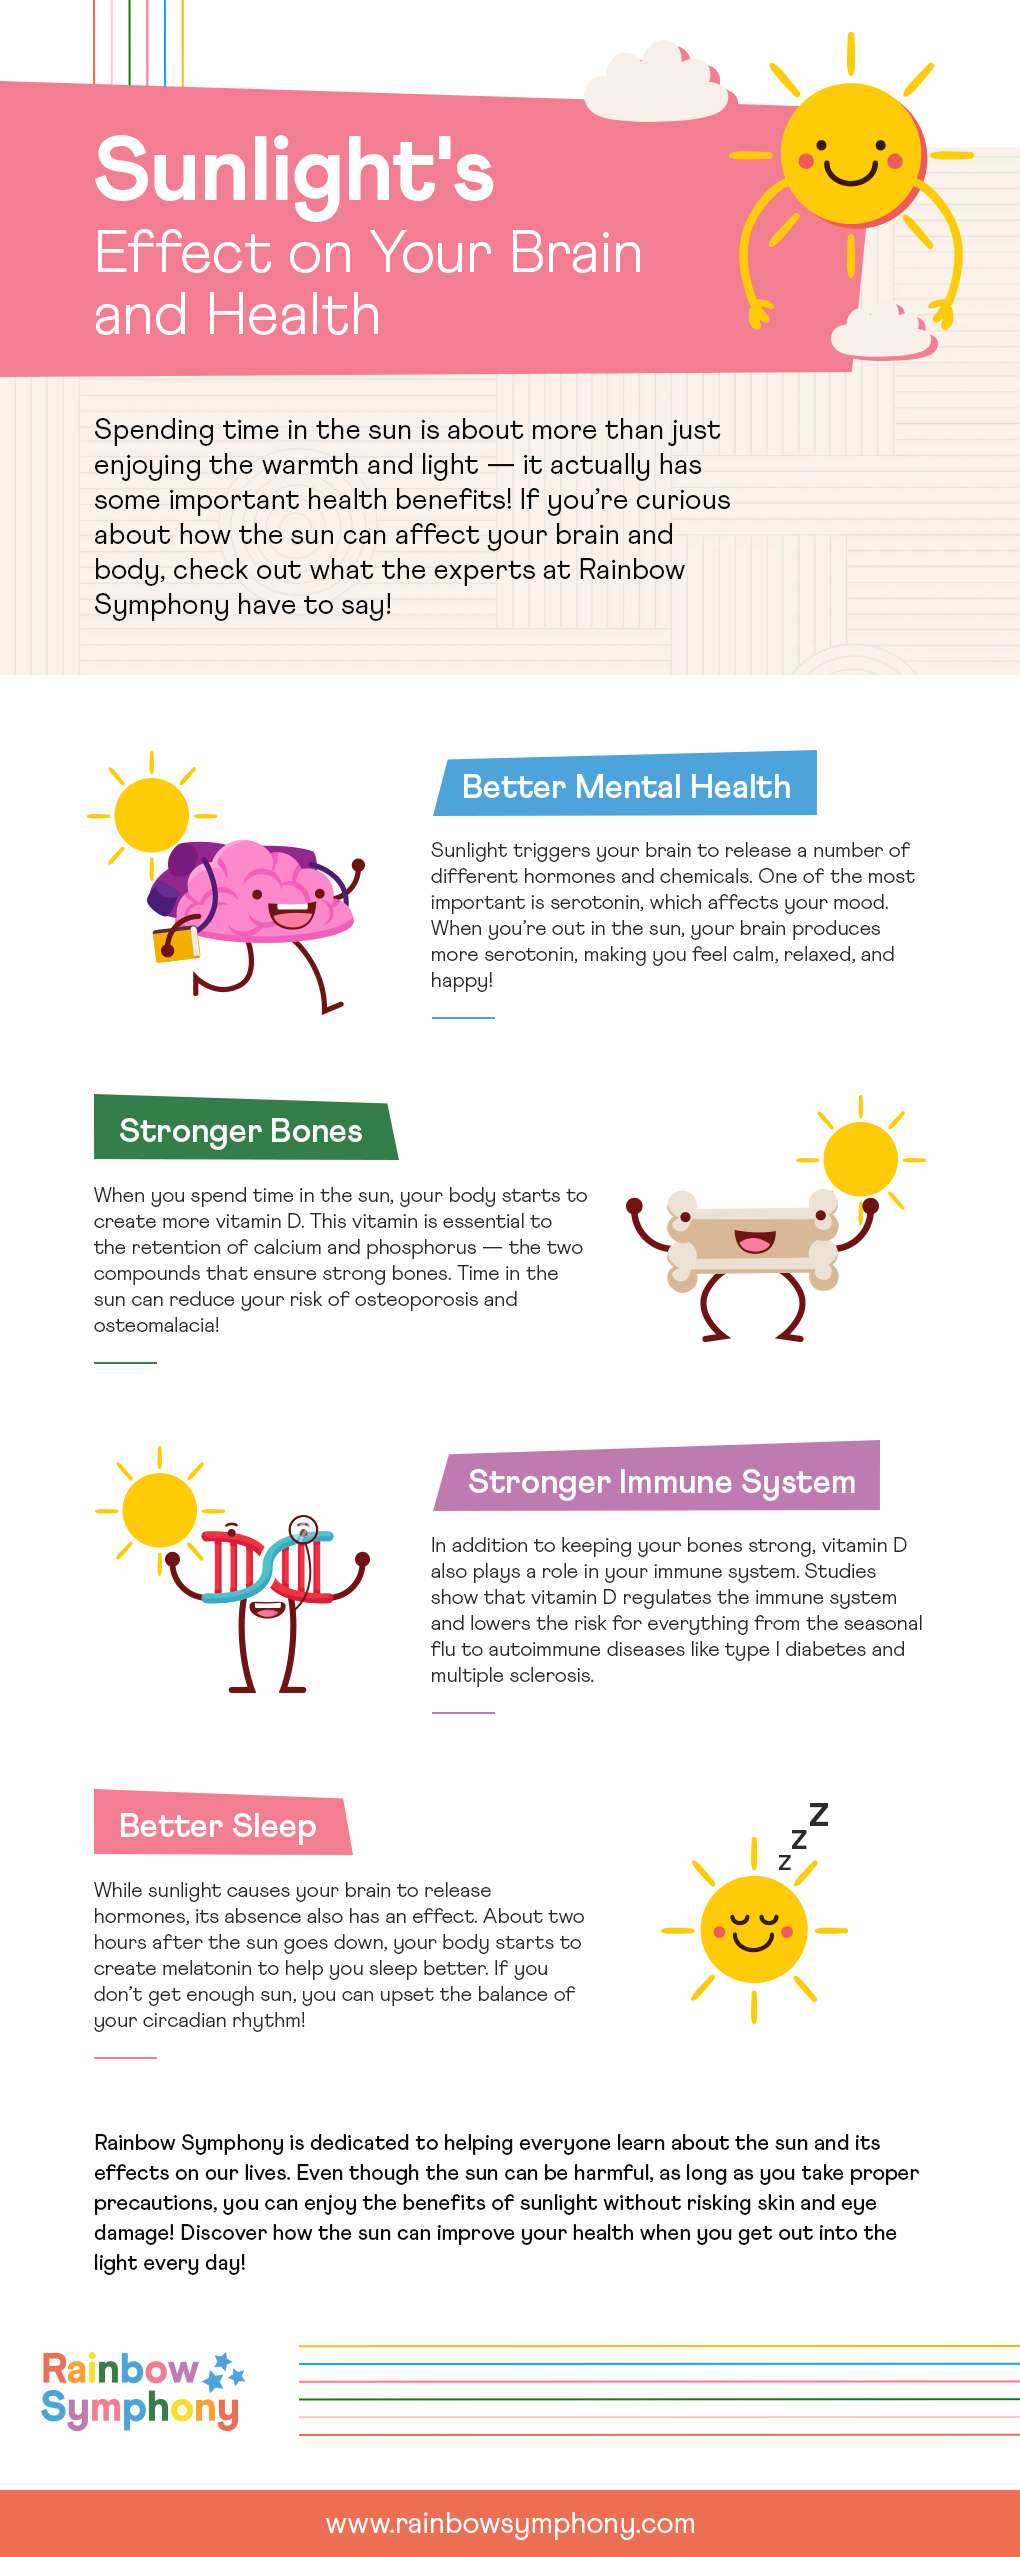 A Rainbow Symphony infographic on sunlight's effect on your brain and health